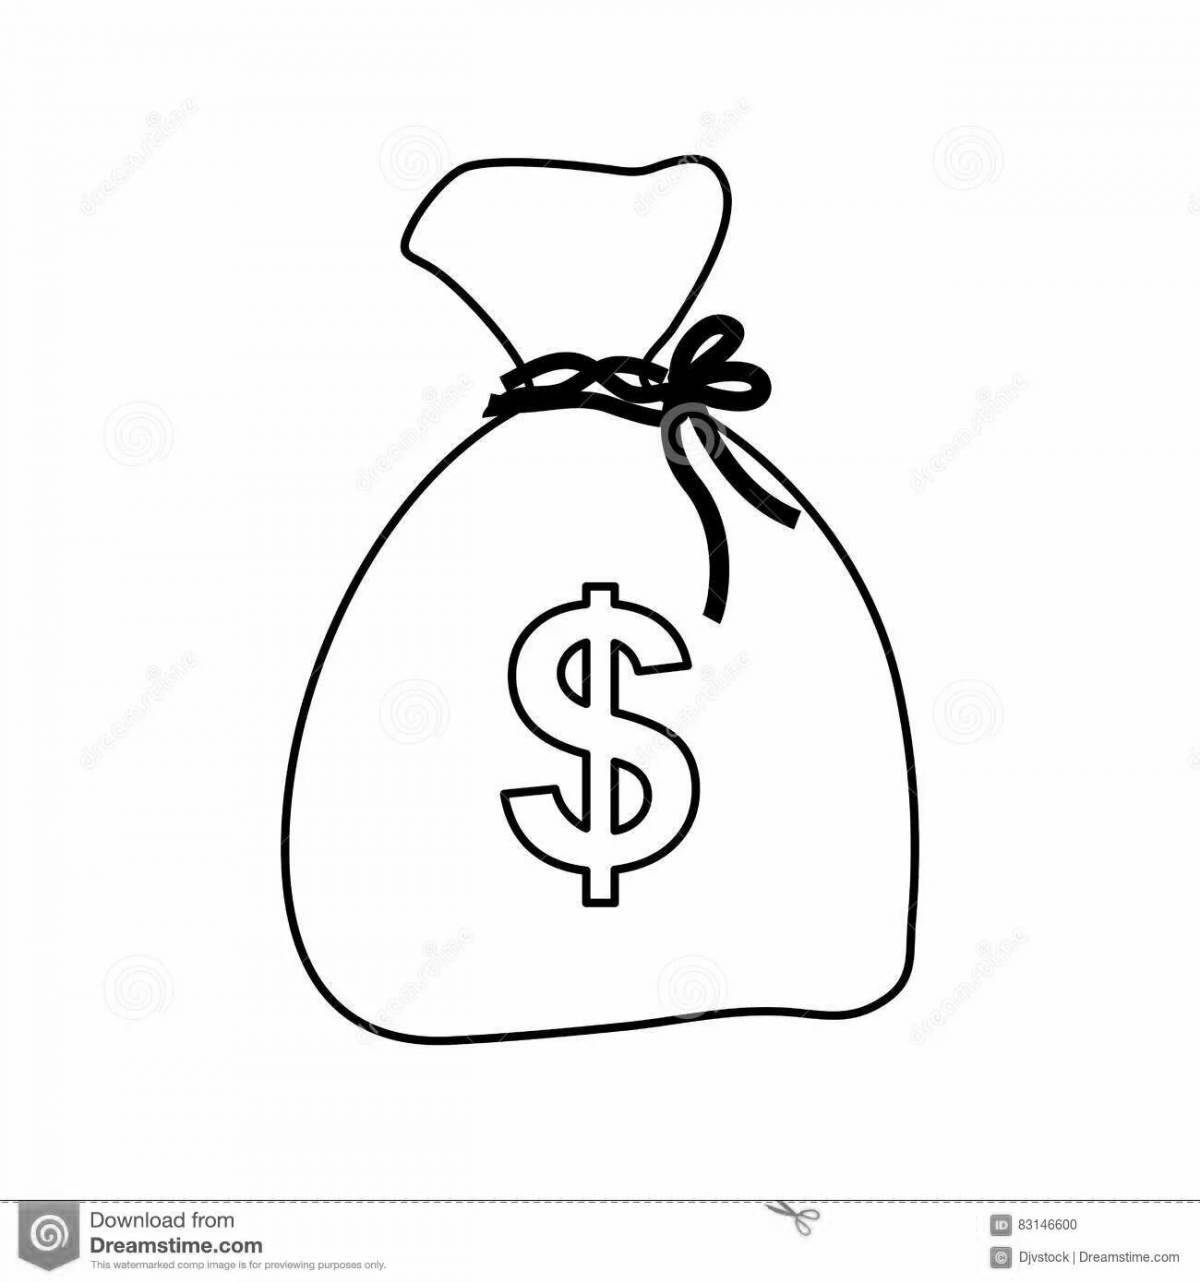 Playful money bag coloring page